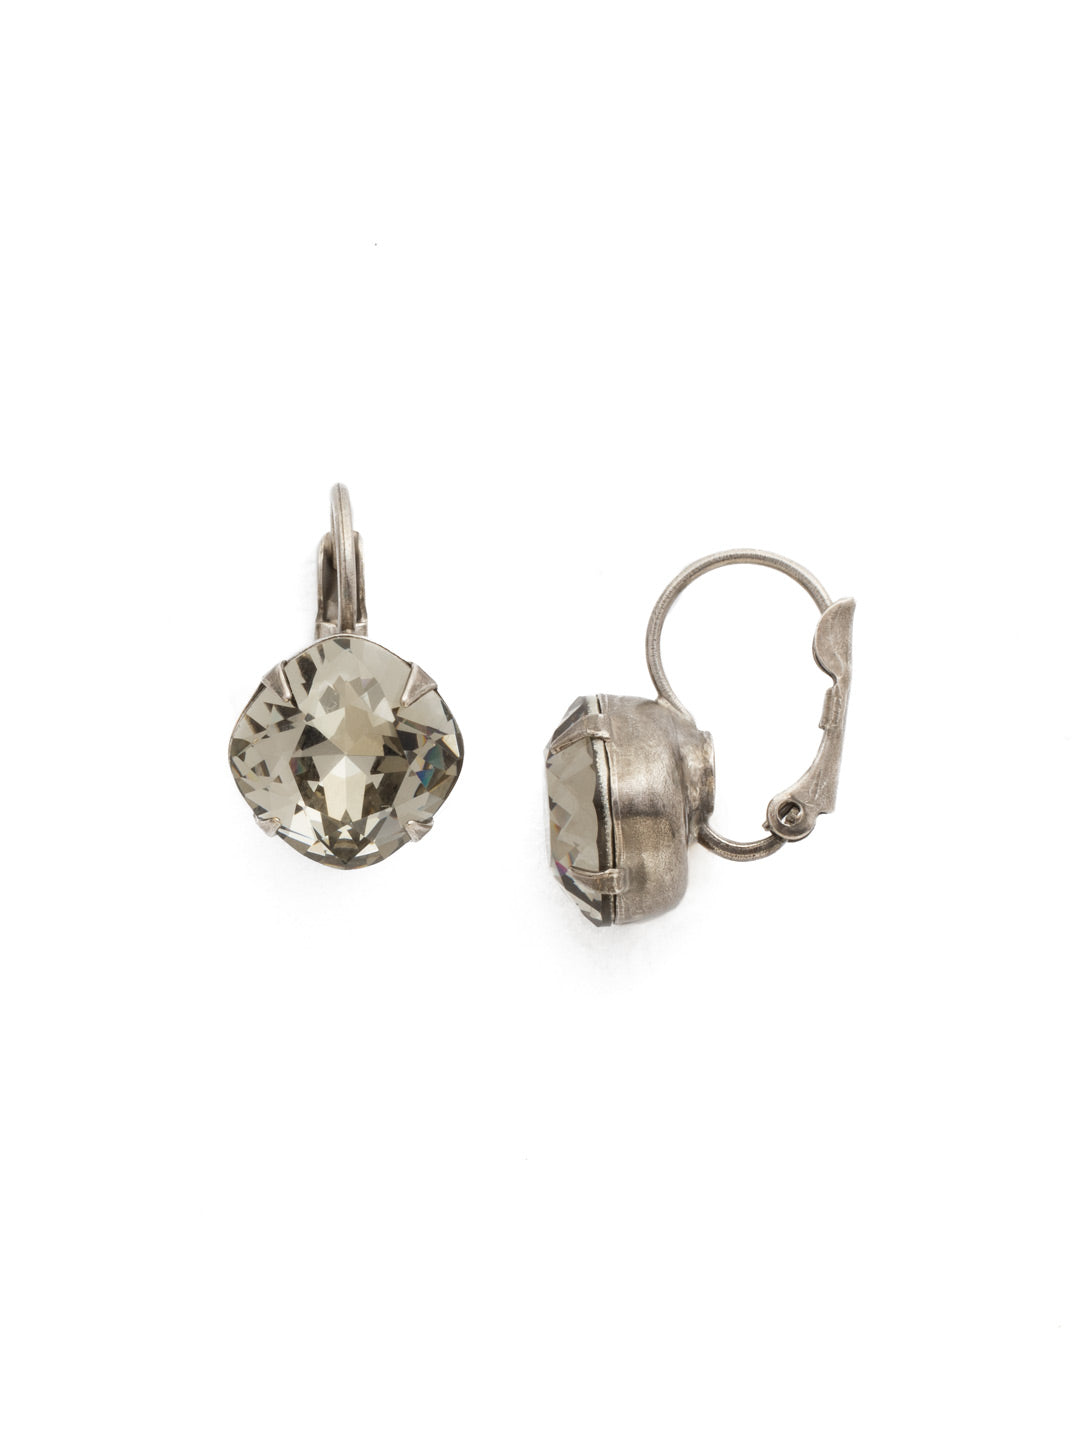 Cushion-Cut Dangle Earrings - EDL12ASBD - A simple, yet stunning earring featuring a cushion cut crystal that will never go out of style. From Sorrelli's Black Diamond collection in our Antique Silver-tone finish.